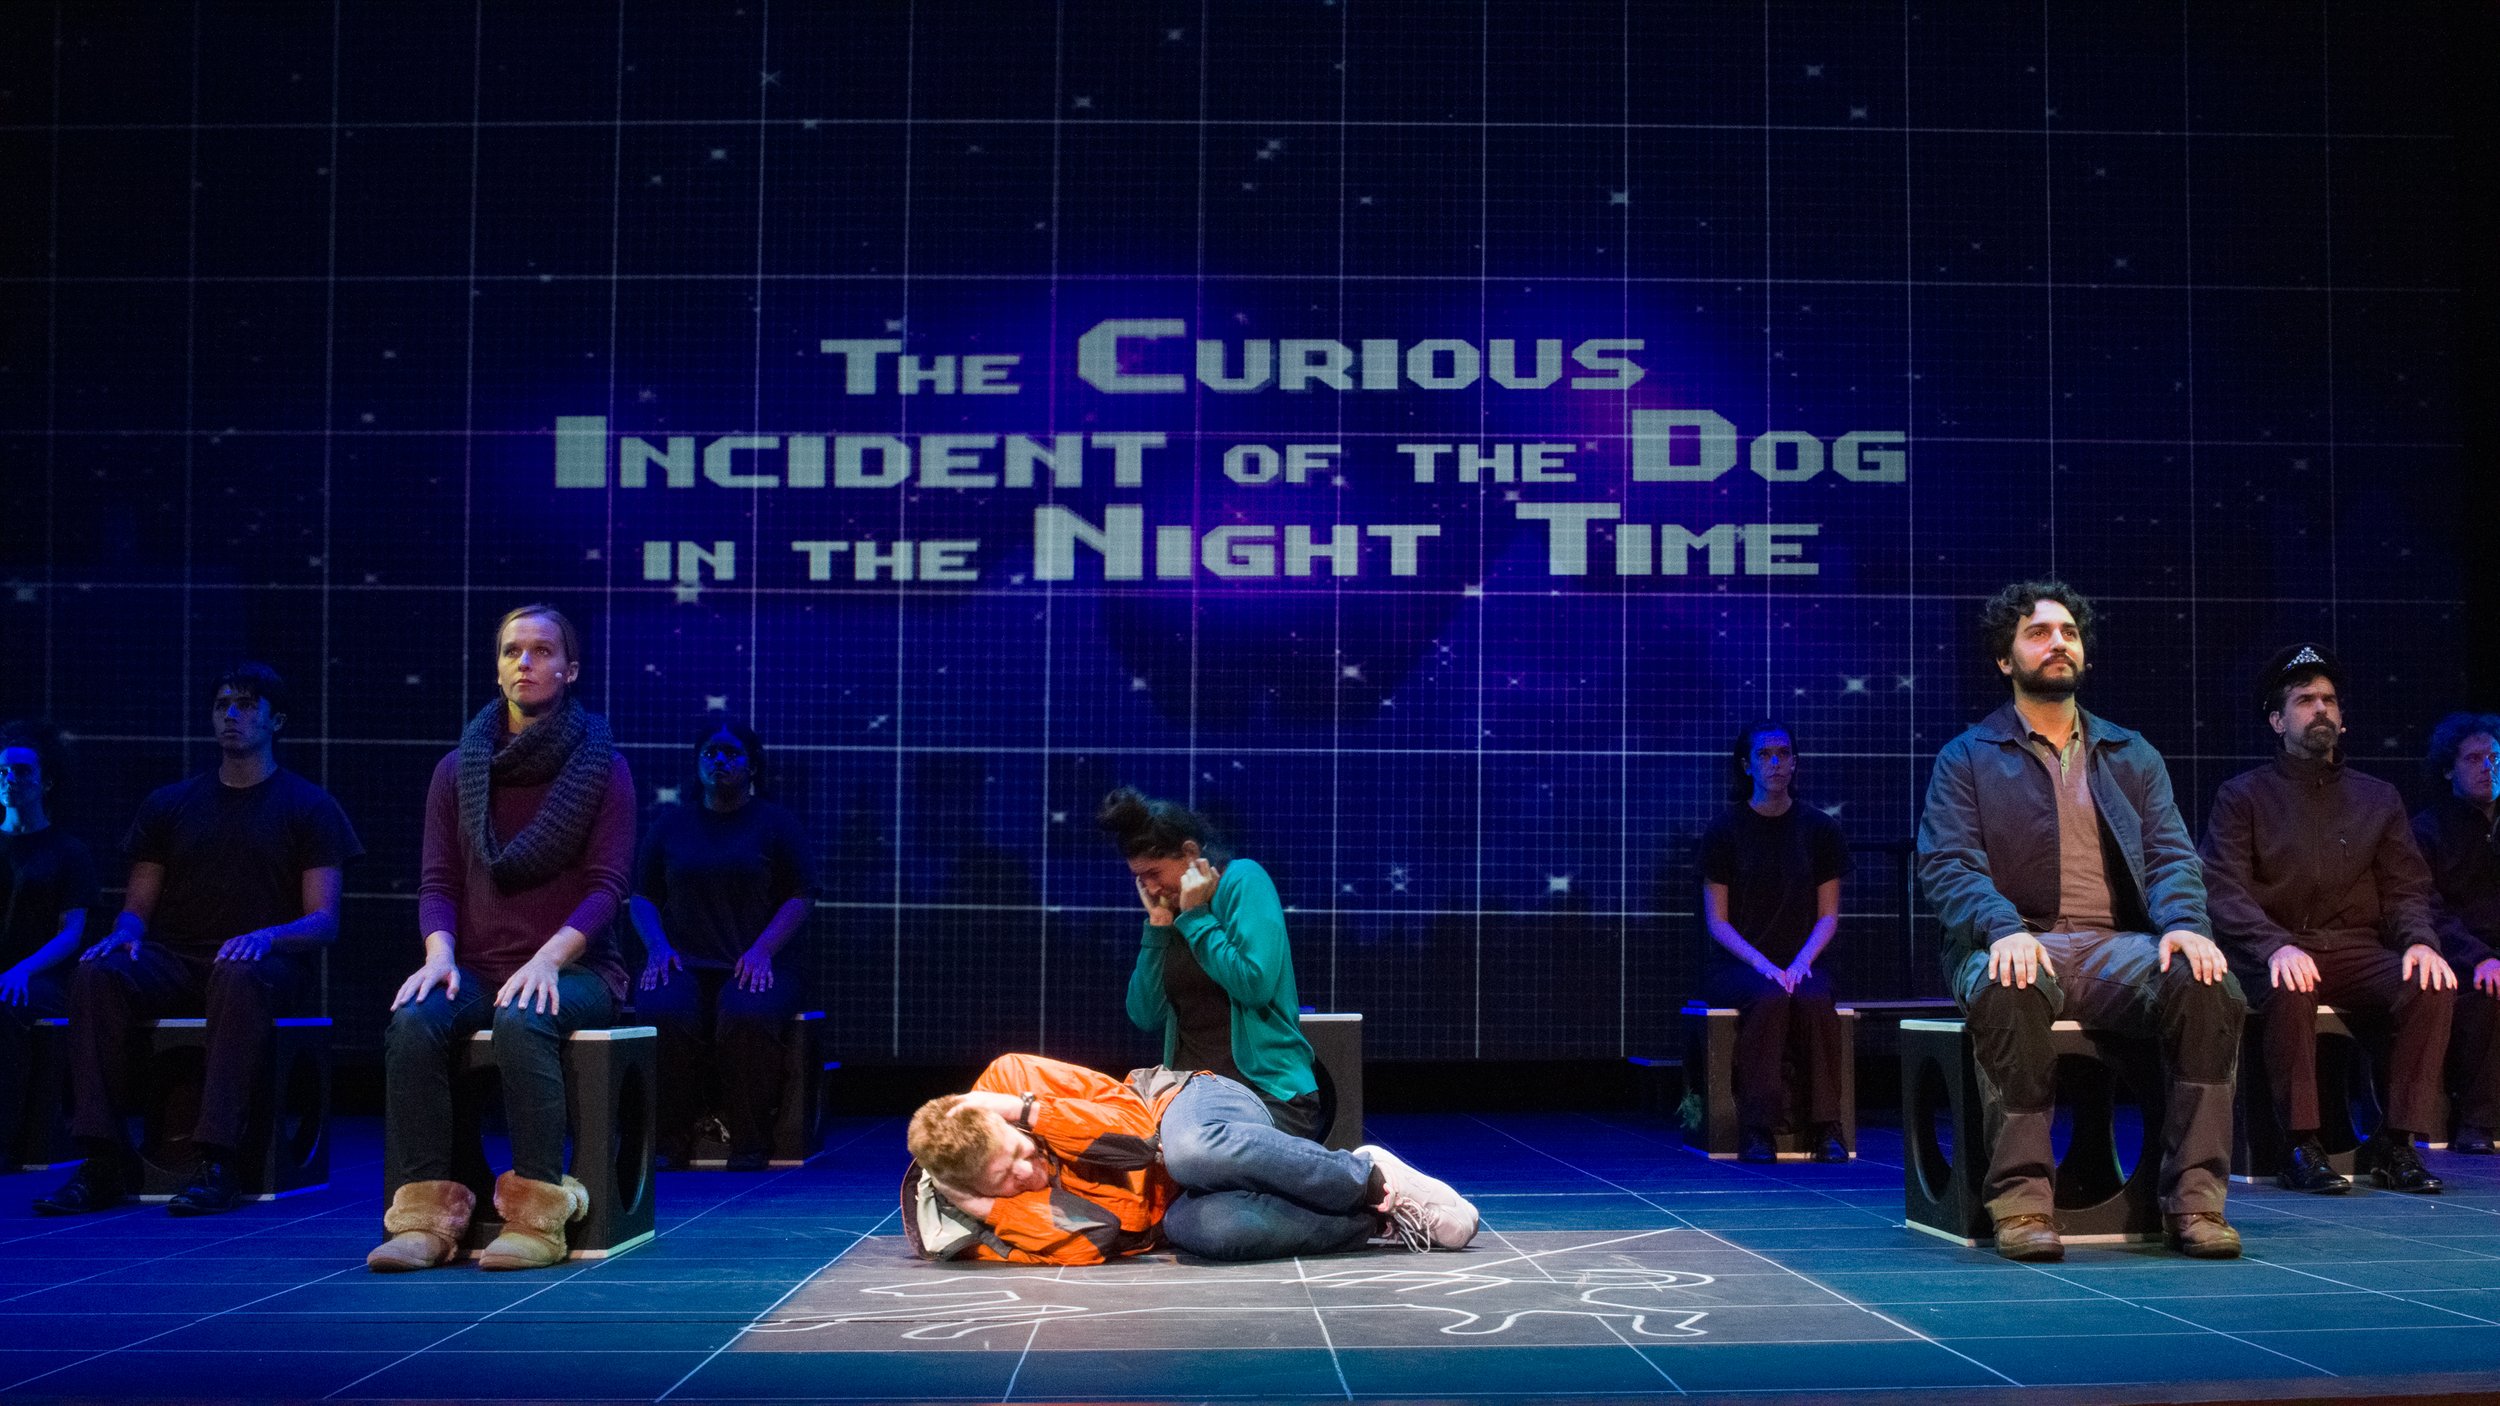  Megan Winberg (front left), Justin Valine (center left), Kiana Spath (center right), Tommy Abraham (Far Right) and the rest of the cast during last dress rehearsal before the first showing of "The Curious Incident of The Dog in The Night-Time" on Th